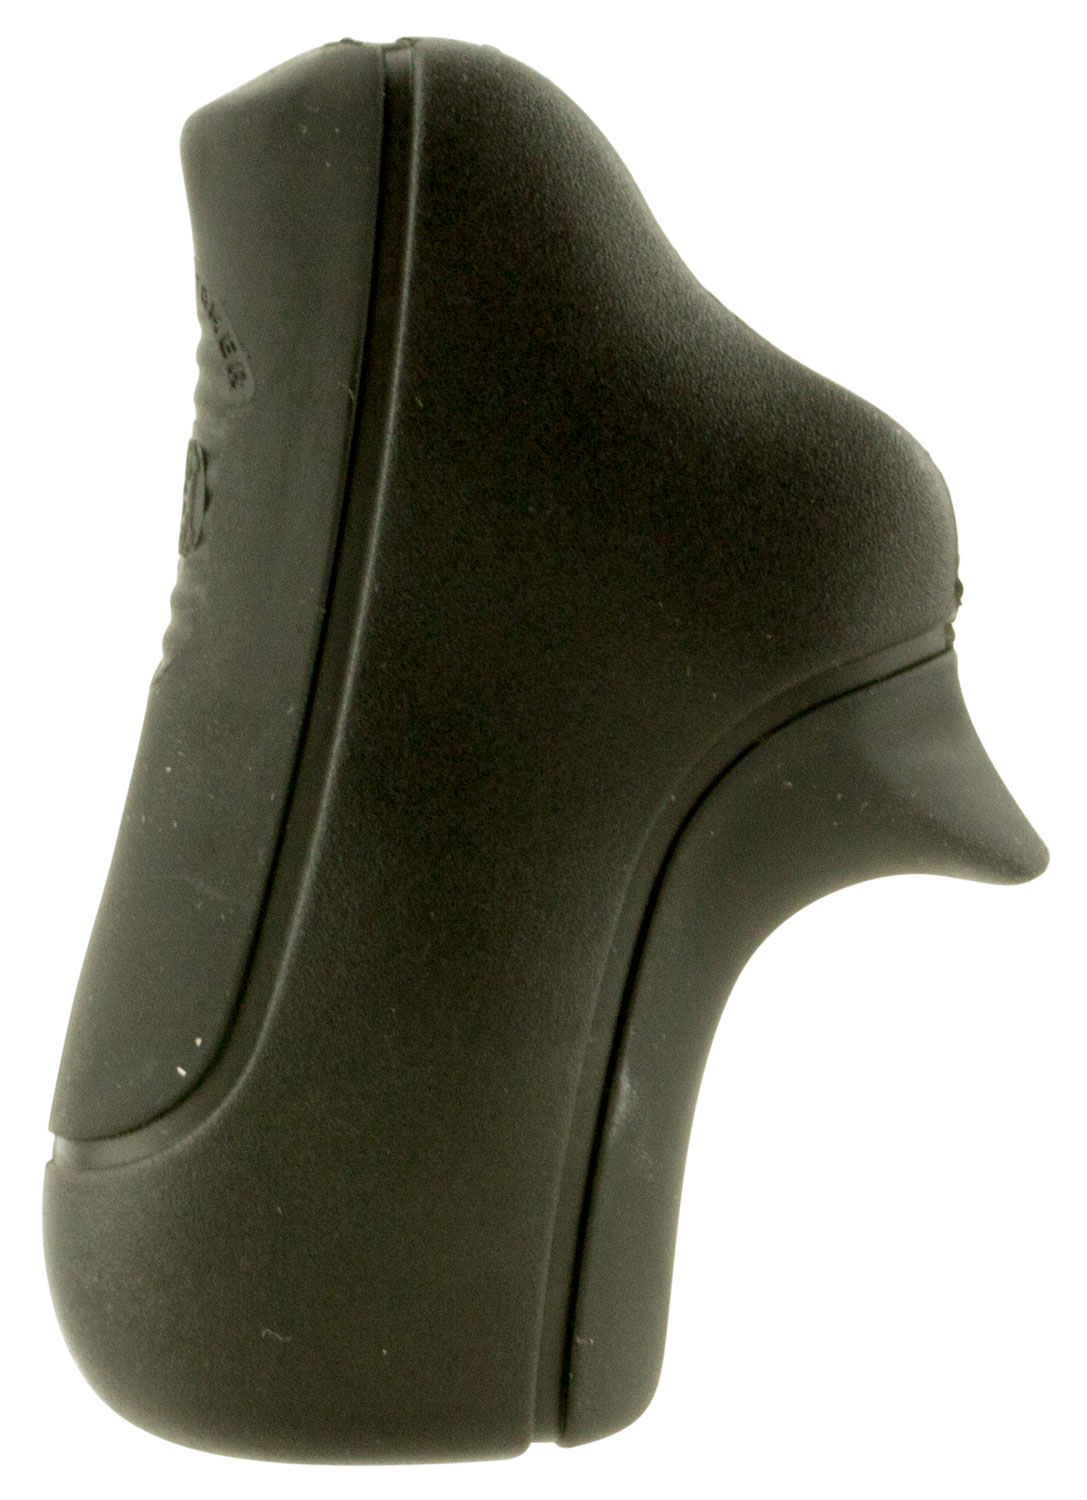 Hogue 78030 Tamer  Black Rubber Cushion Grip without Finger Grooves for Ruger LCR, LCRx